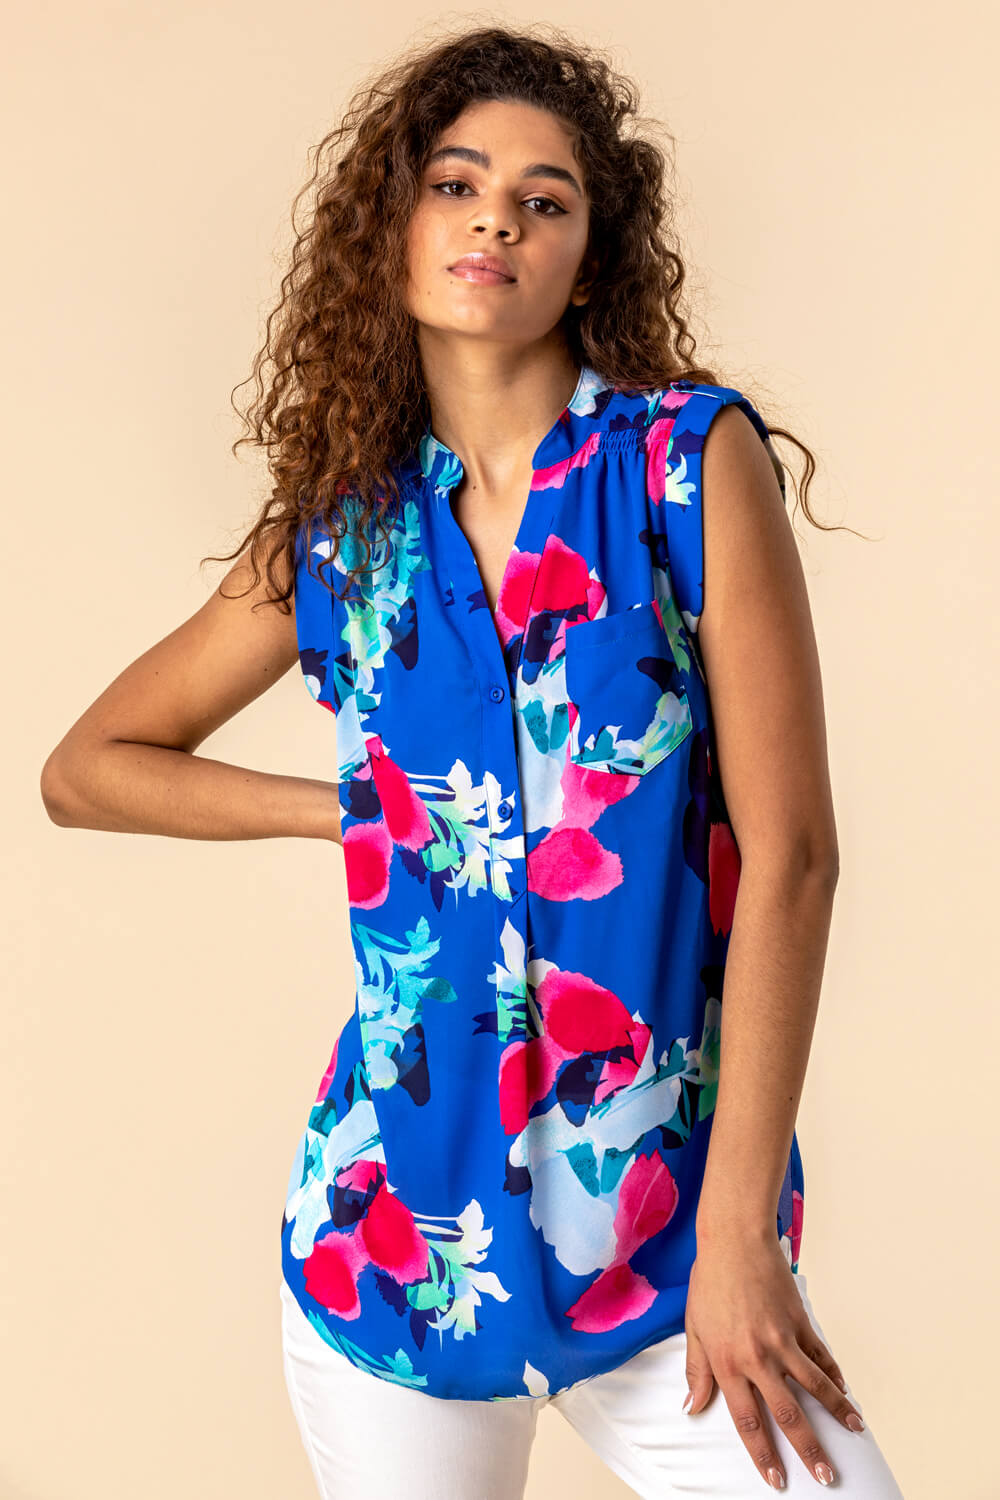 Royal Blue Floral Print Tunic Top, Image 1 of 5